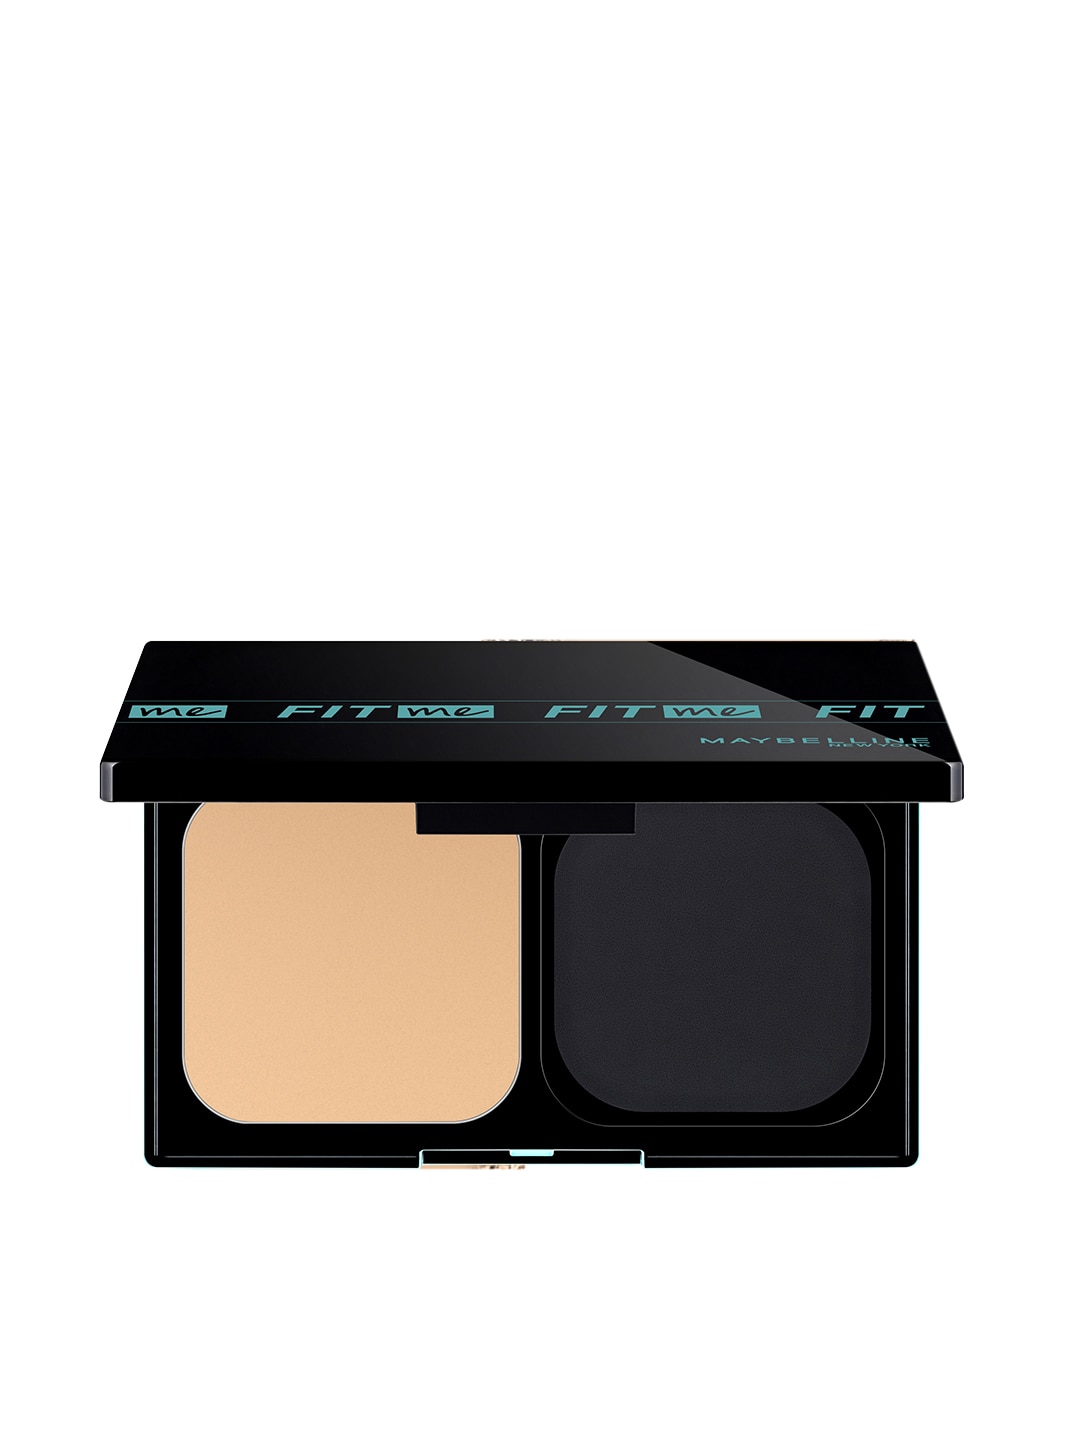 Maybelline New York Fit Me SPF 44 Ultimate Powder Foundation - Shade 128 Price in India